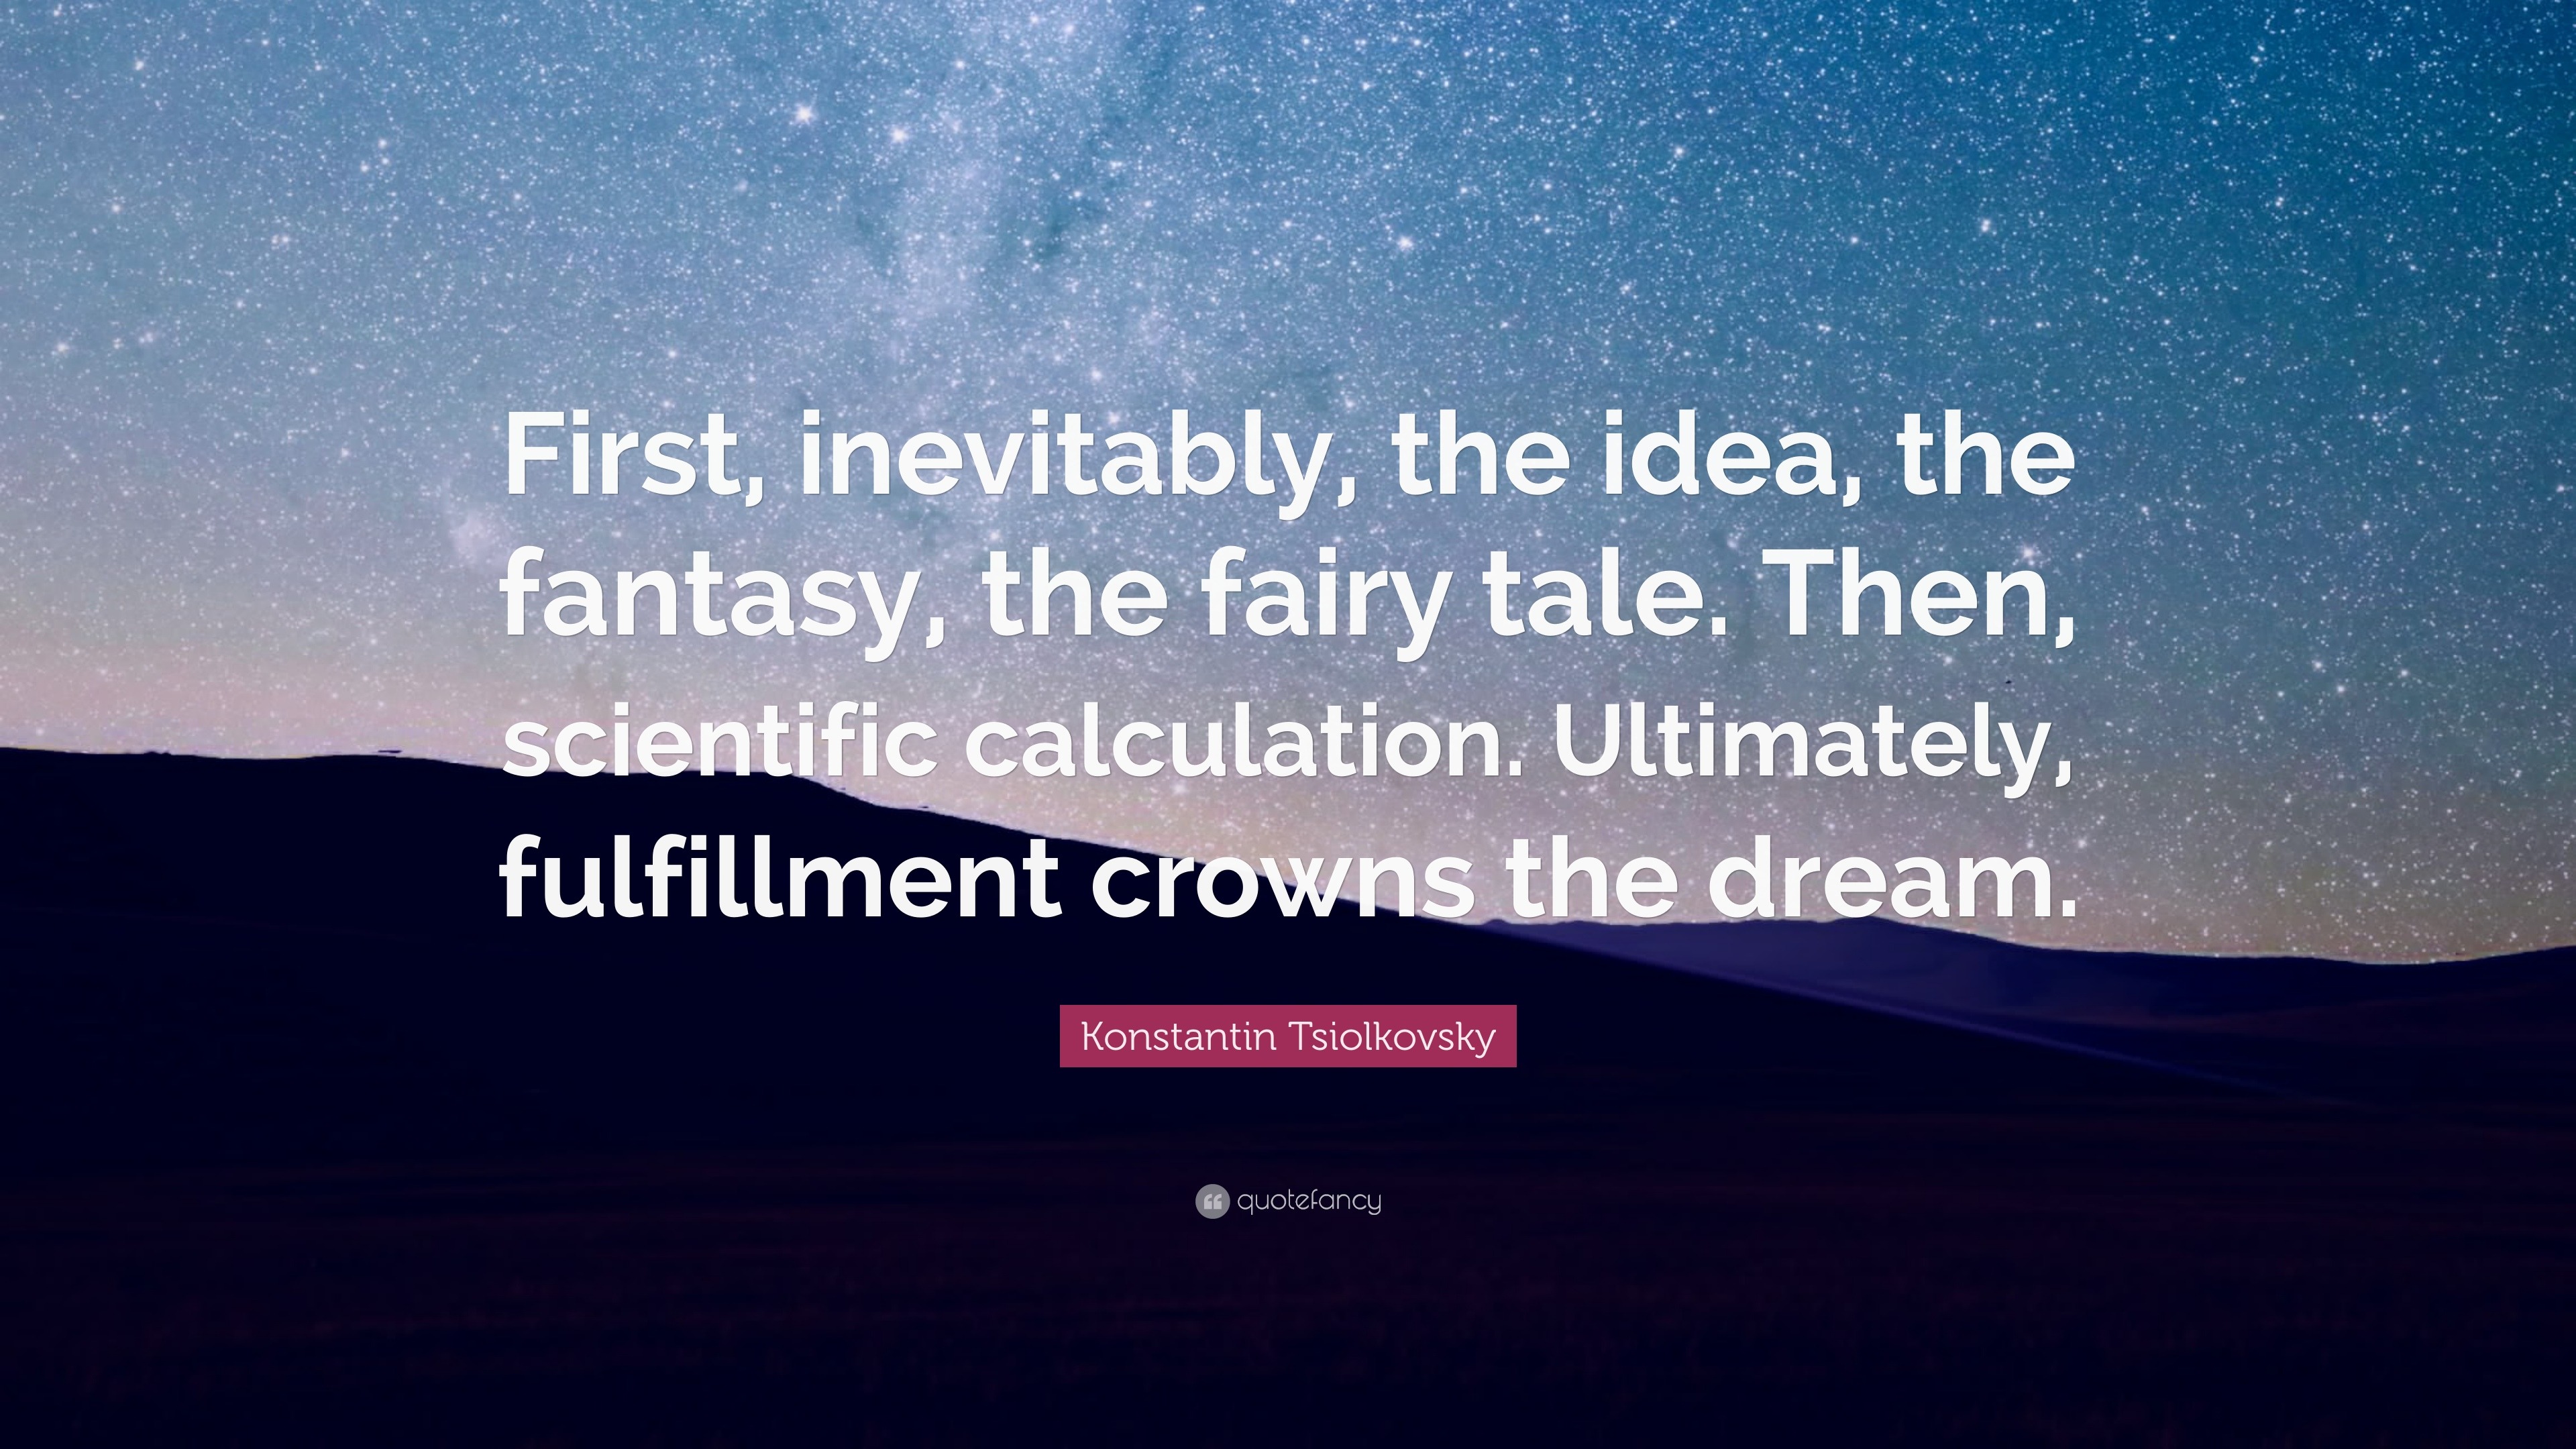 Konstantin Tsiolkovsky Quote: “First, inevitably, the idea, the fantasy, the fairy tale. Then, scientific calculation. Ultimately, fulfillment crowns t...”